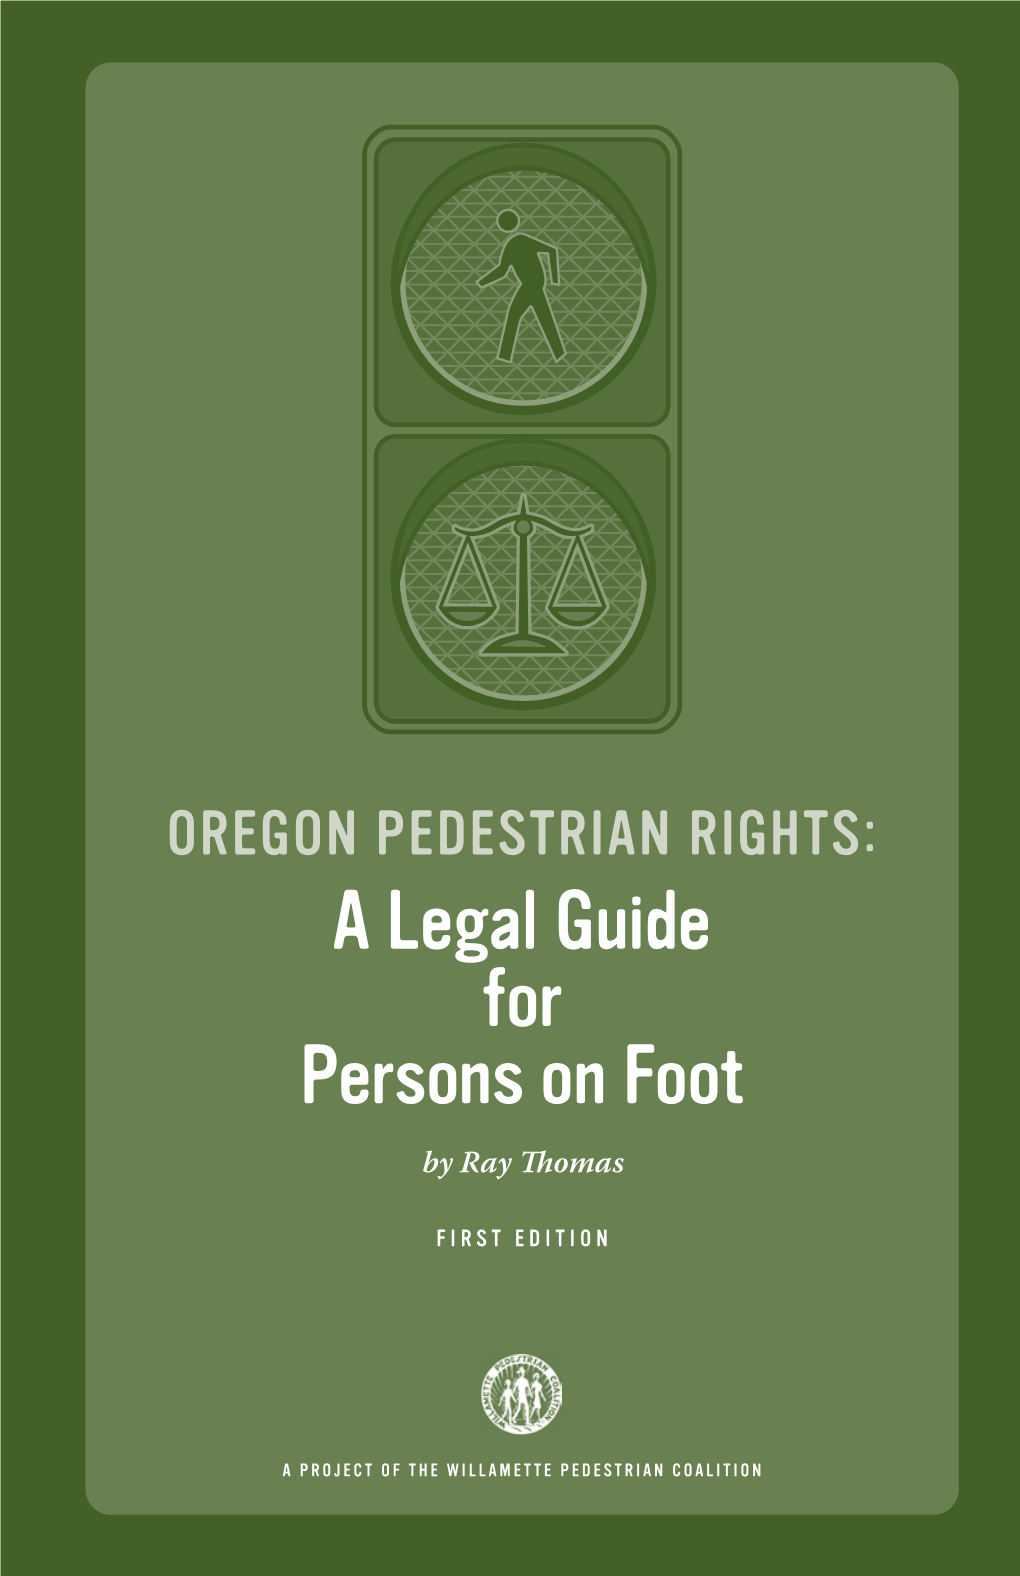 Oregon Pedestrian Rights: a Legal Guide for Persons on Foot Is a Part of the Education Program of the Willamette Pedestrian Coalition (WPC)